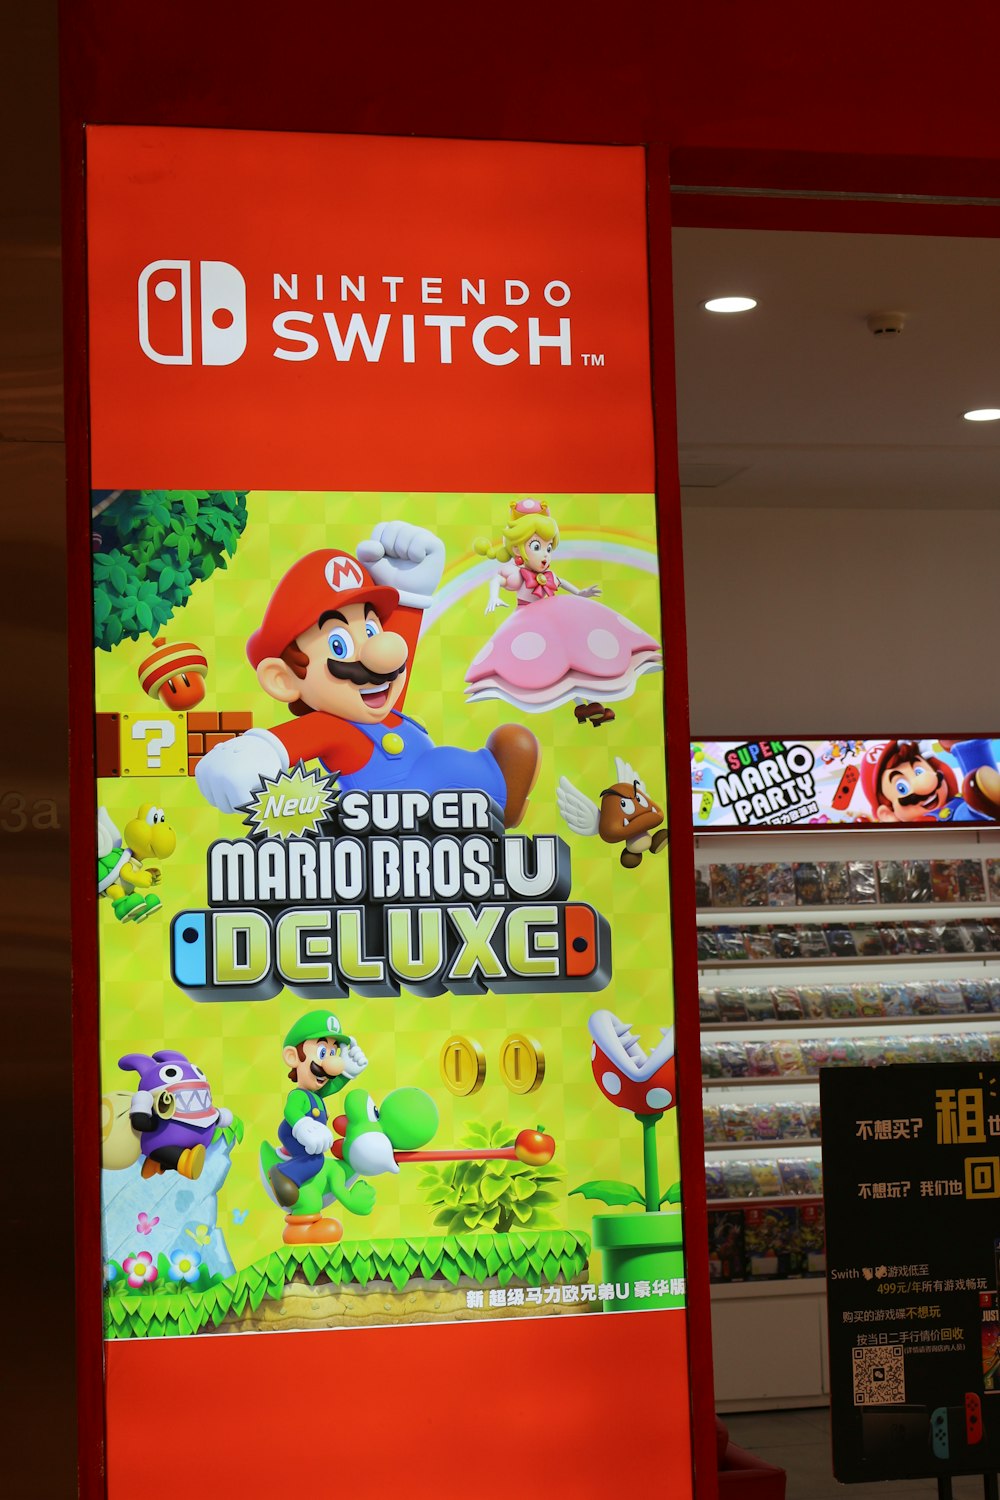 a nintendo switch advertisement in a store